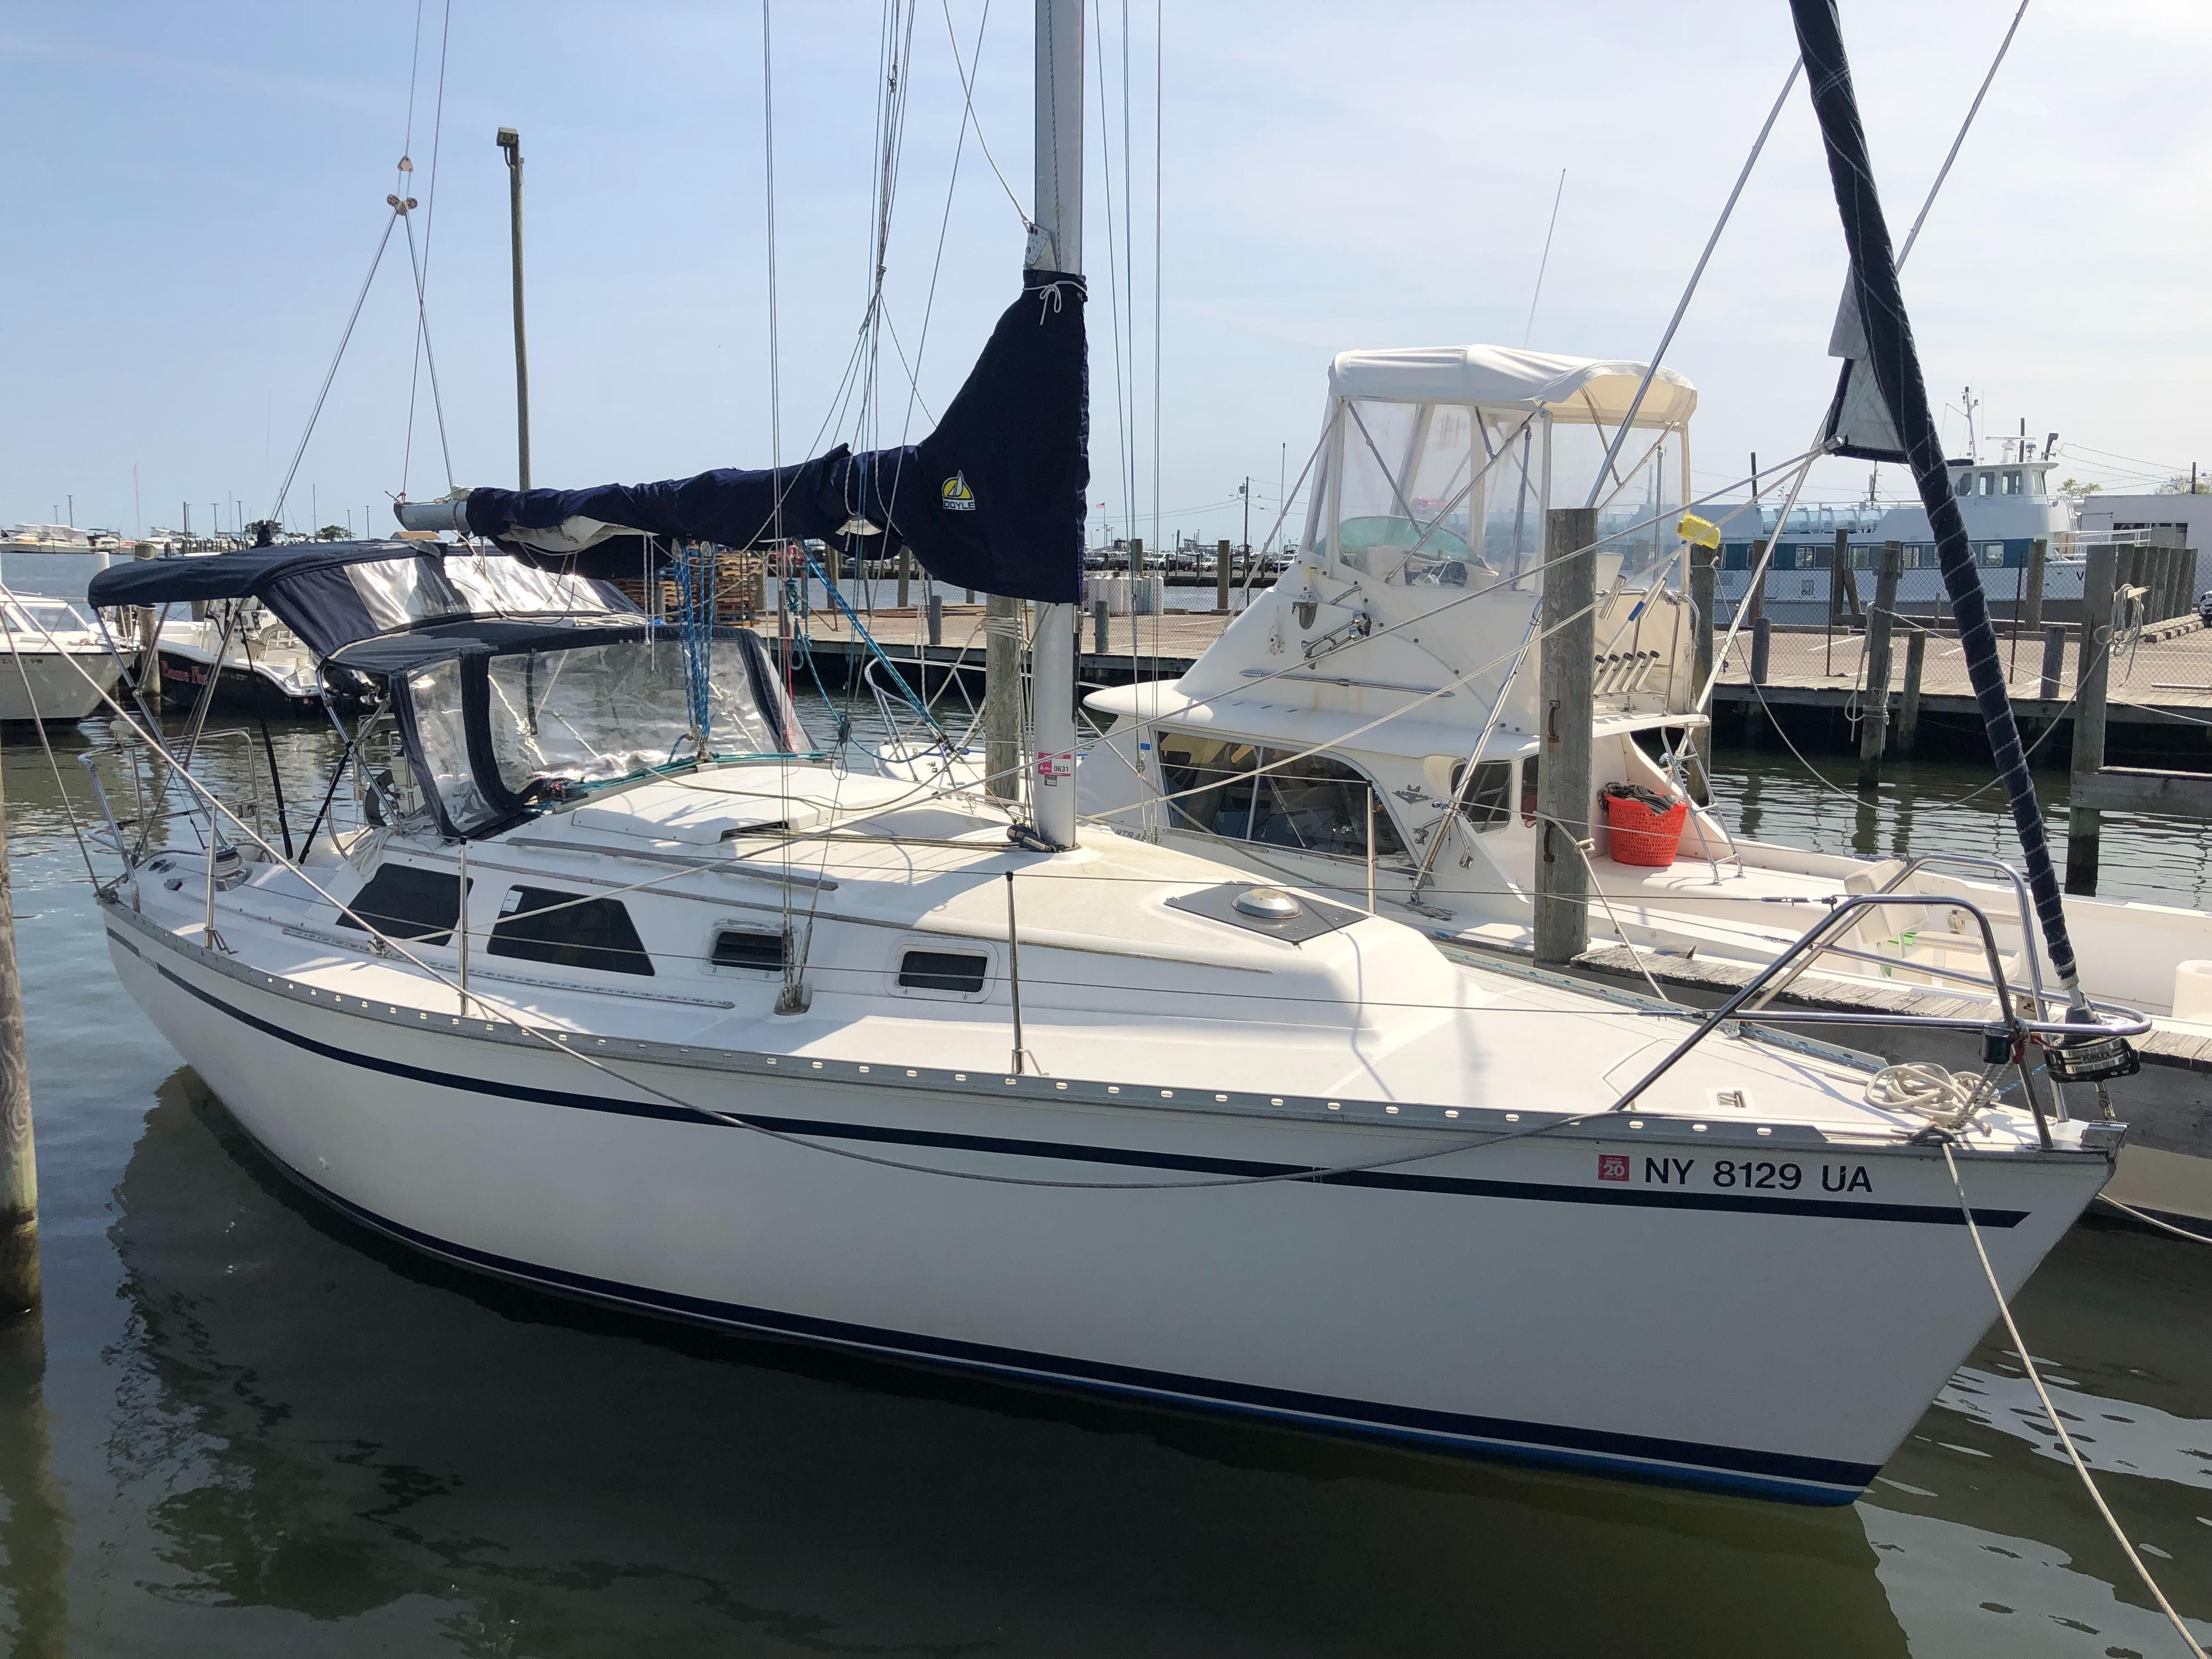 28 ft sailboats for sale